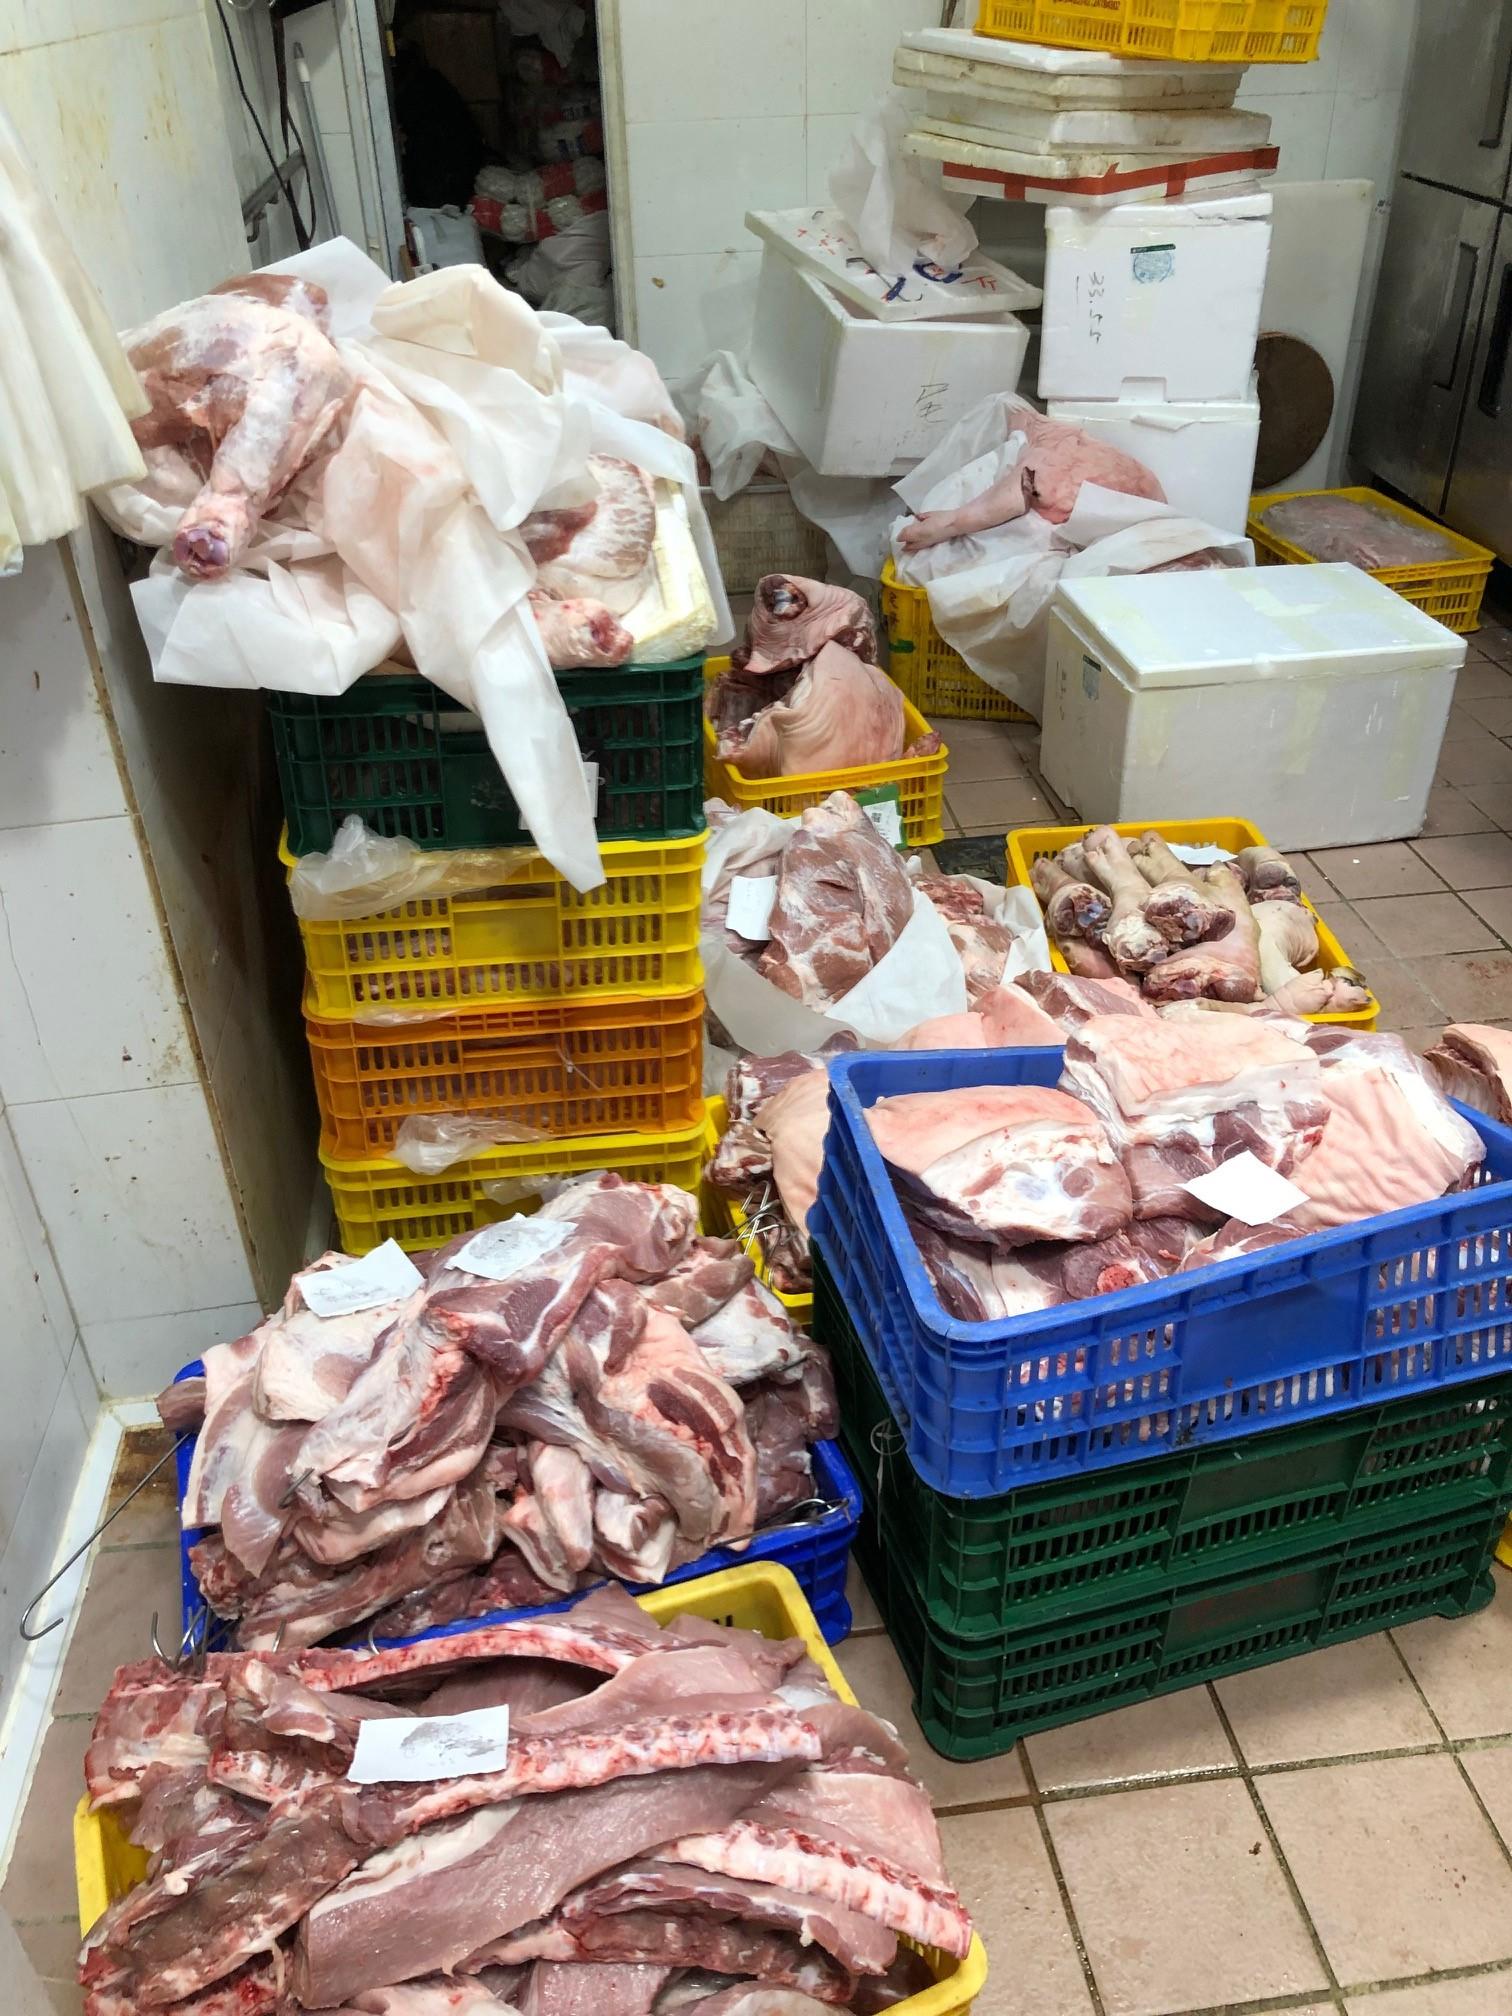 The Food and Environmental Hygiene Department has raided a licensed fresh provision shop in Chun Yeung Street, North Point, suspected of selling chilled meat or frozen meat as fresh meat in a blitz operation this morning (December 17). Photo shows the meat seized during the operation.